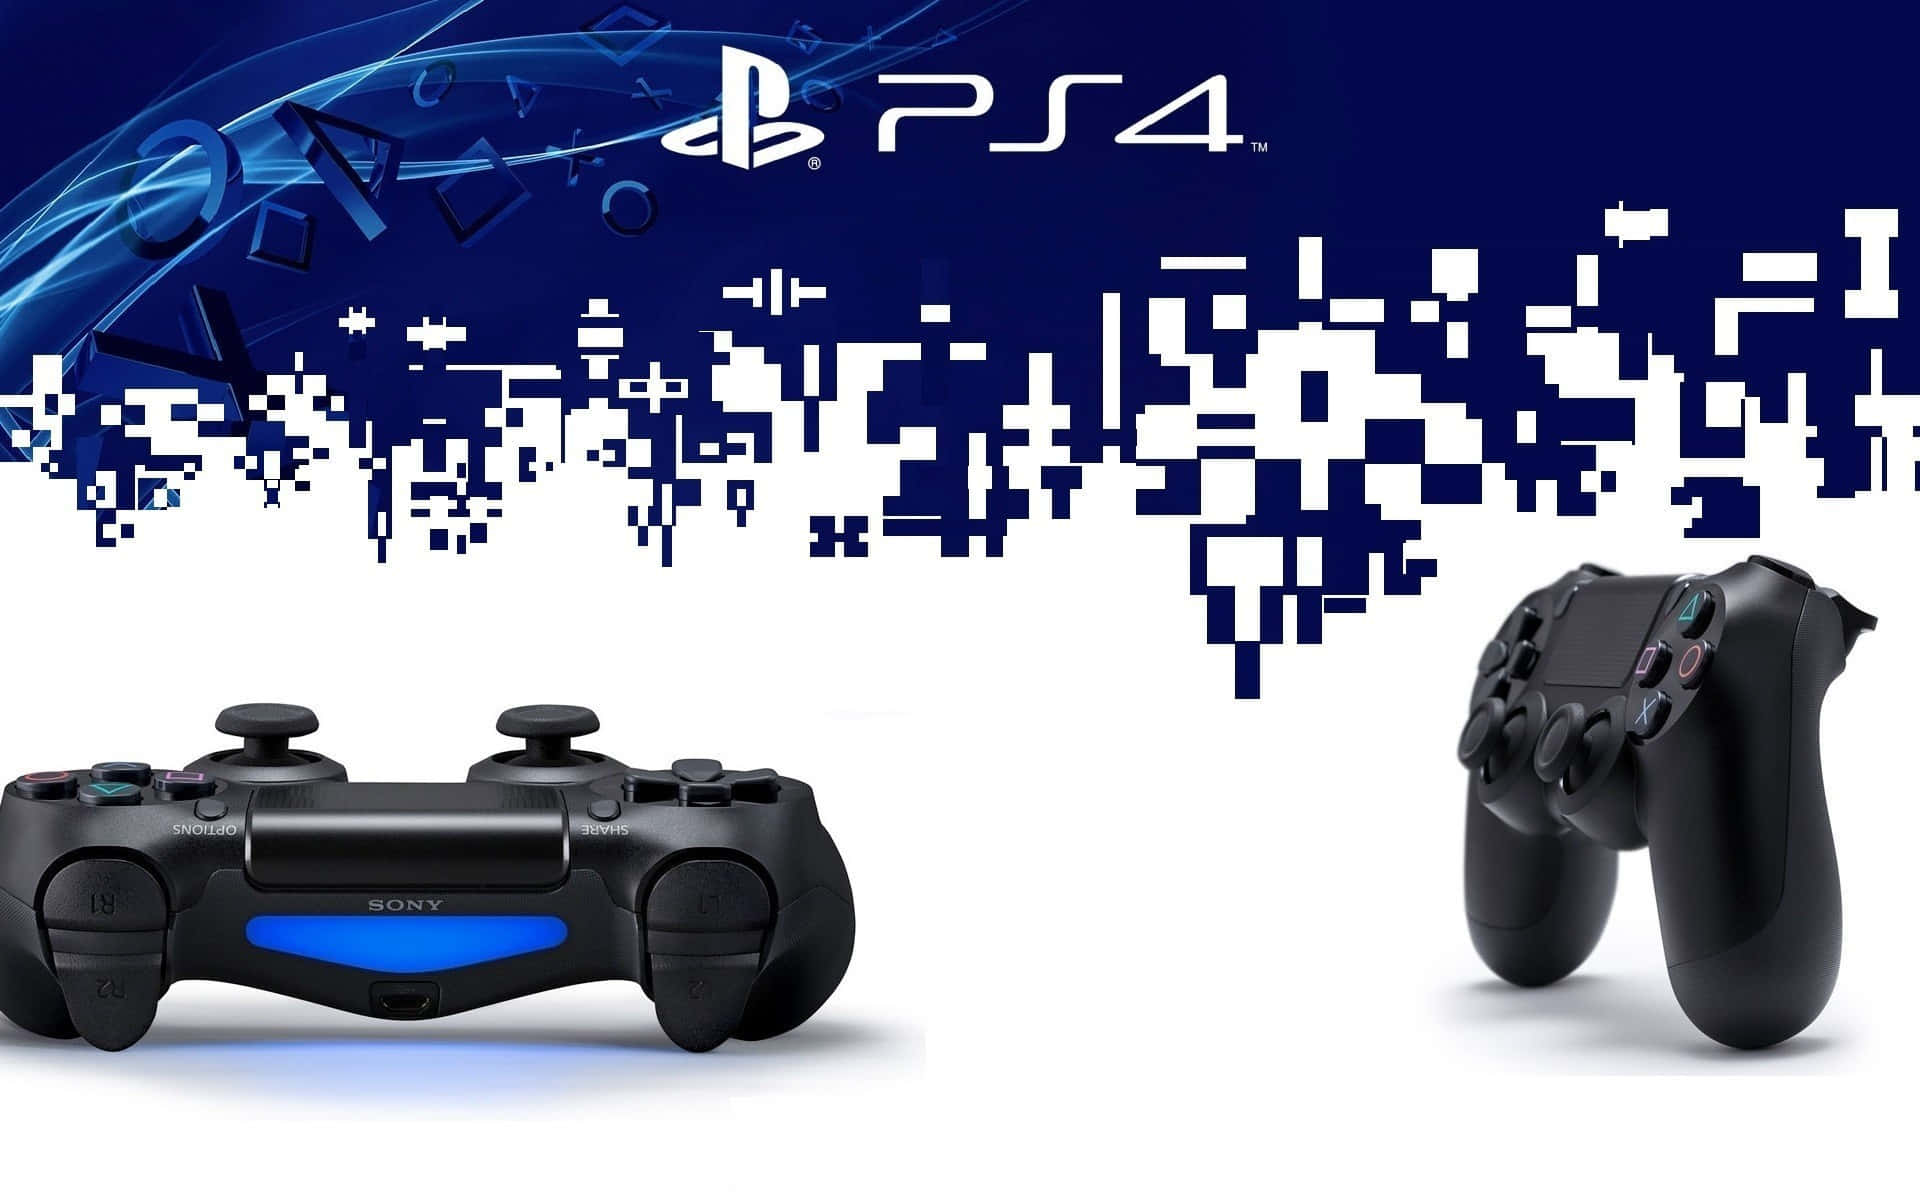 Get Creative with Advanced Technologies on the PS4